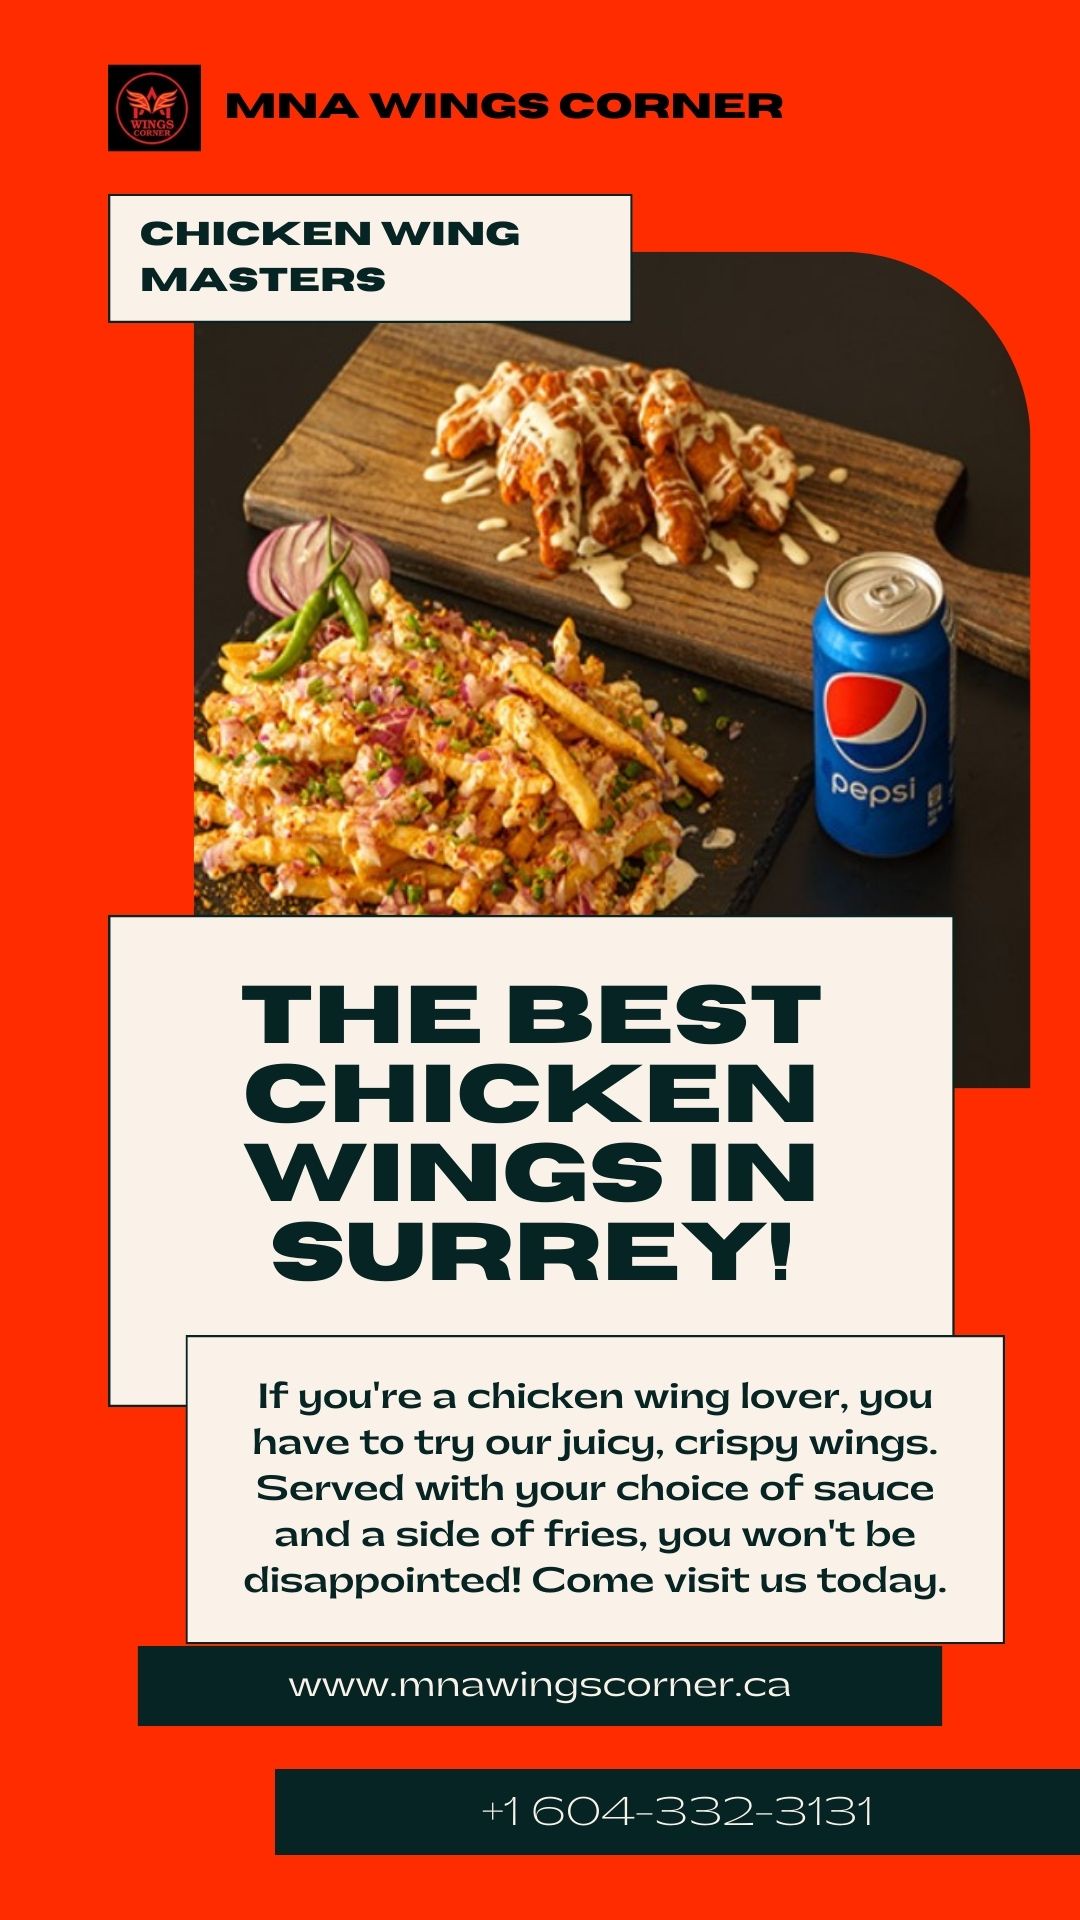 Experience the Bite of Super Delicious and Fresh Chicken Wings and Pizza at our Restaurant in Surrey BC